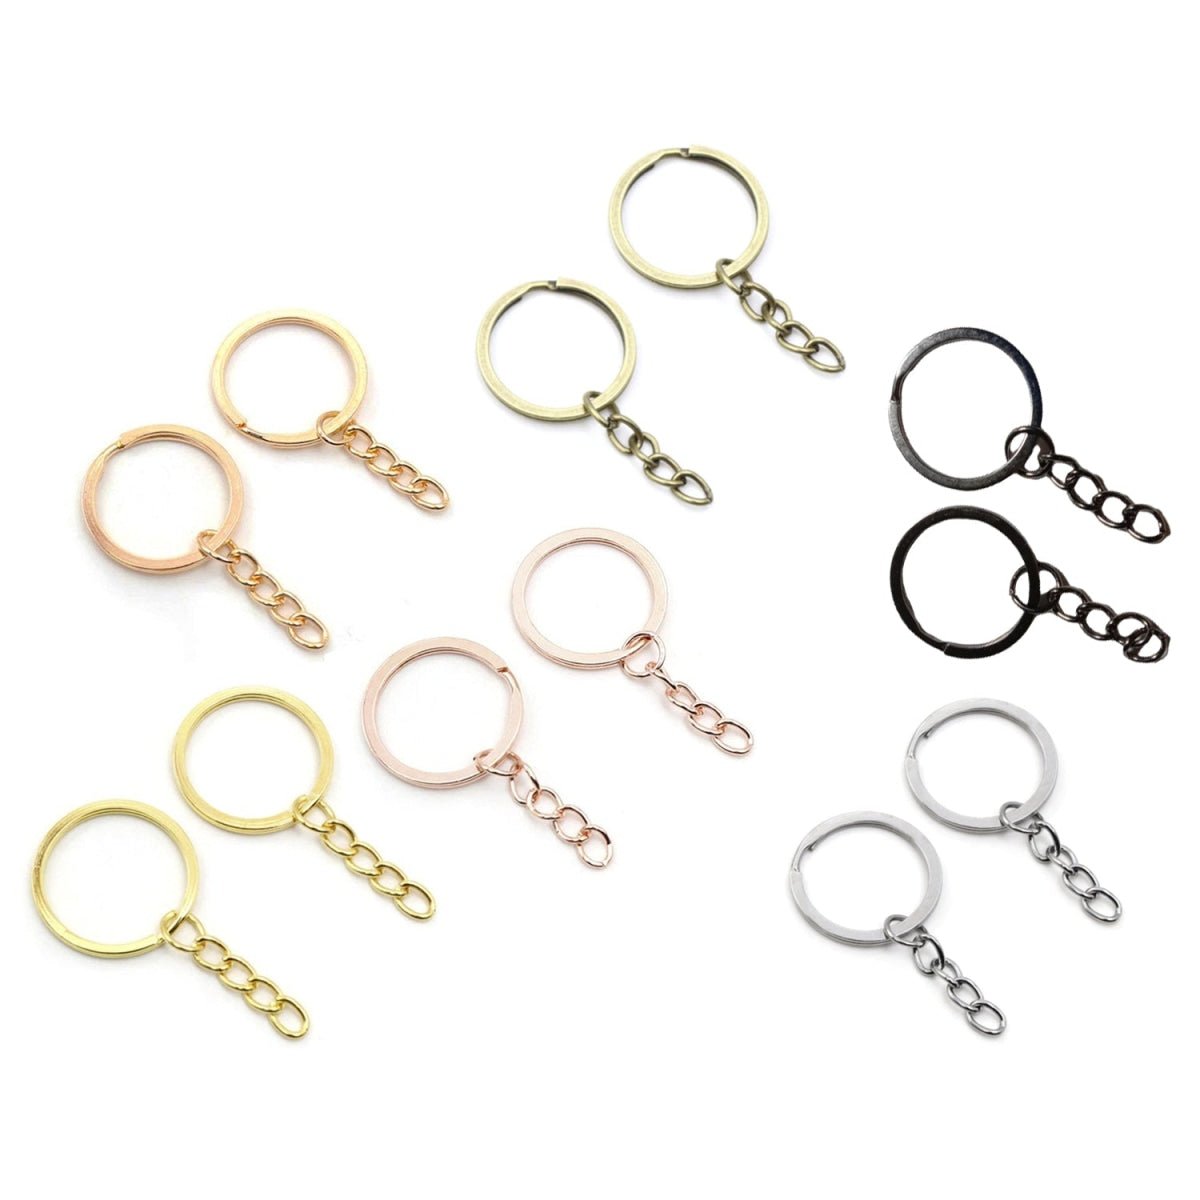 20pcs 30mm Rose Gold Ancient Keyring Keychain Split Ring Chain Key Rings Key Chains - Gold - - Asia Sell